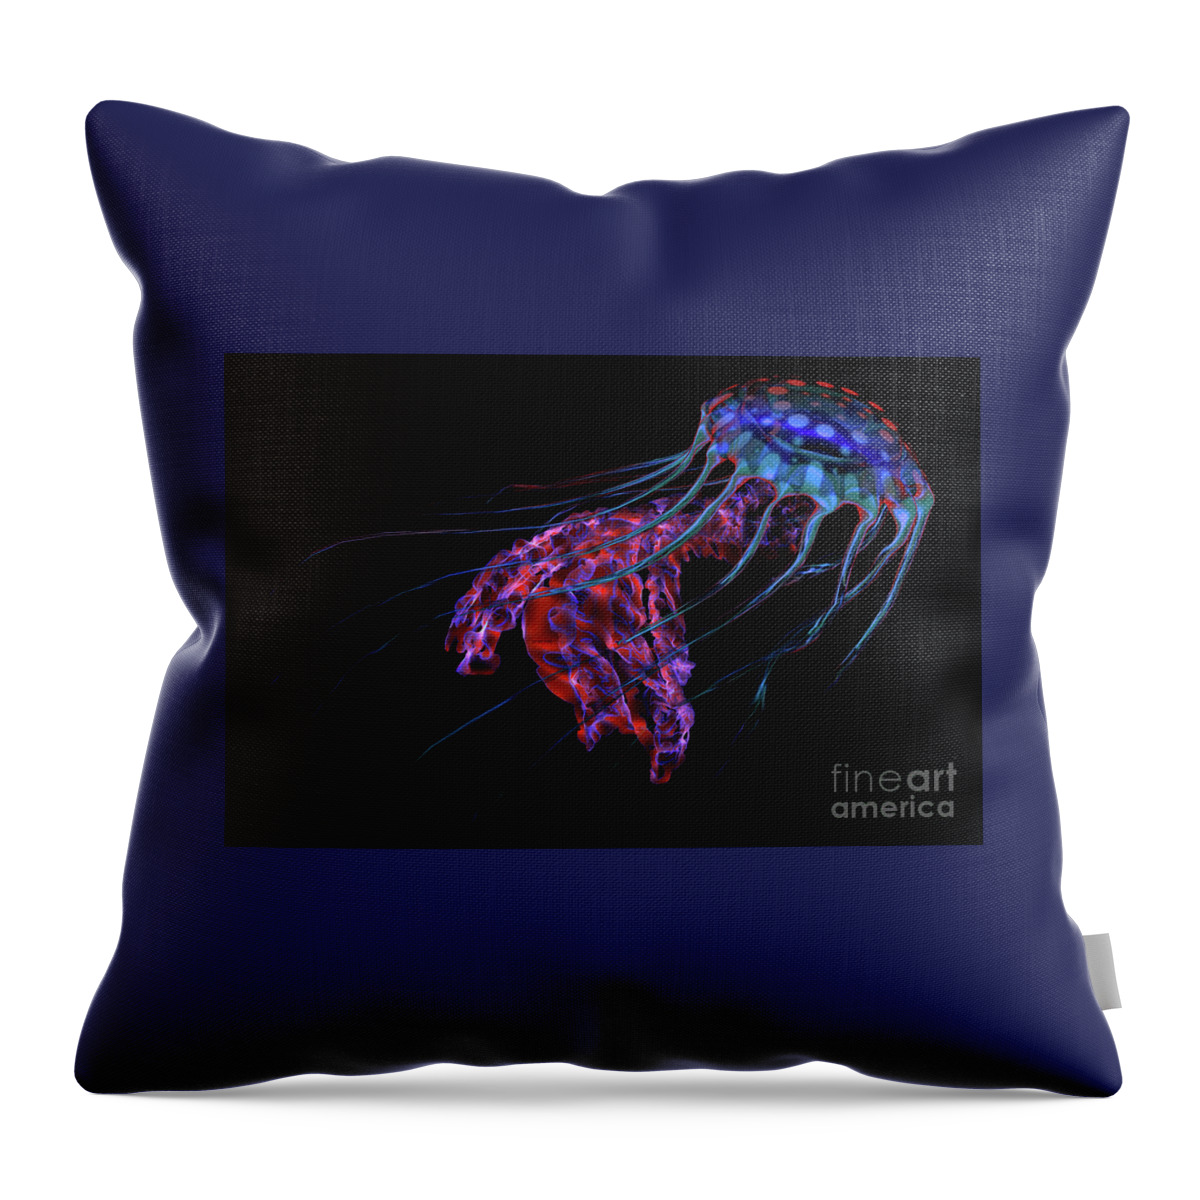 Jellyfish Throw Pillow featuring the digital art Blue Red Jellyfish on Black by Corey Ford